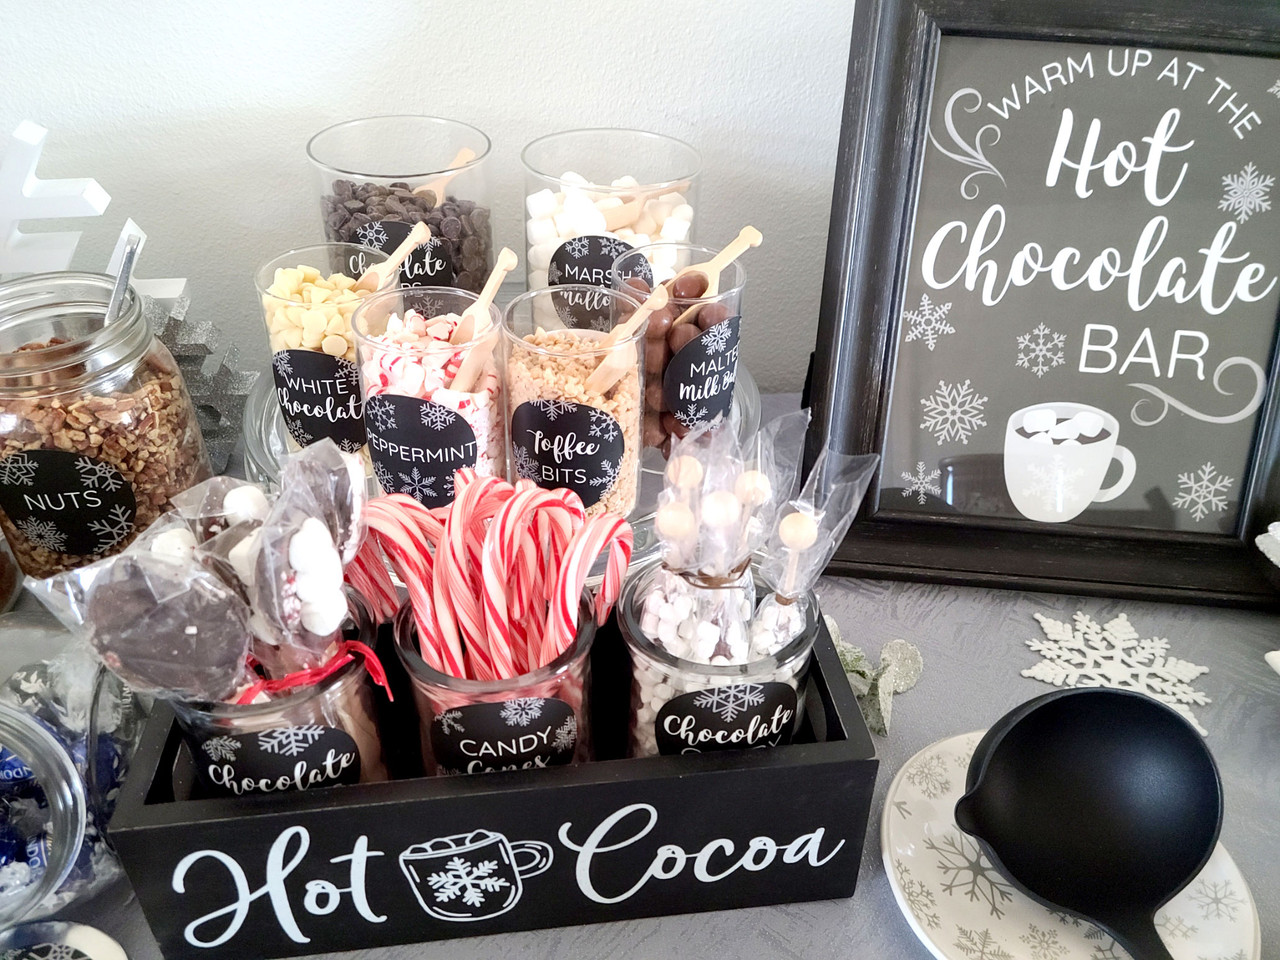 Hot cocoa bar kit 2.5 labels + 8x10 paper sign